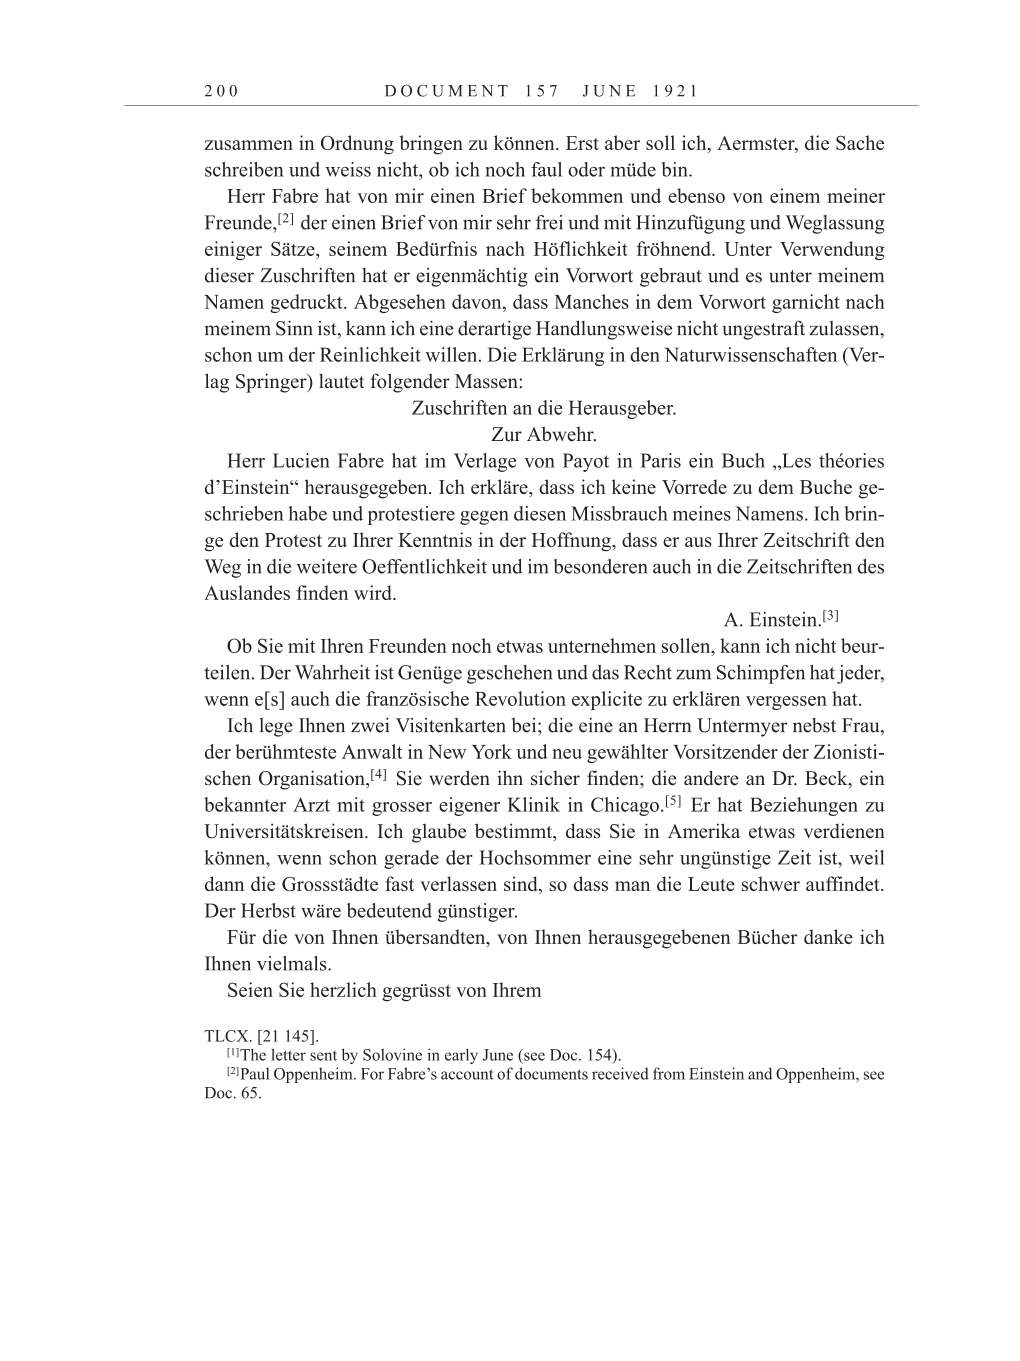 Volume 12: The Berlin Years: Correspondence January-December 1921 page 200